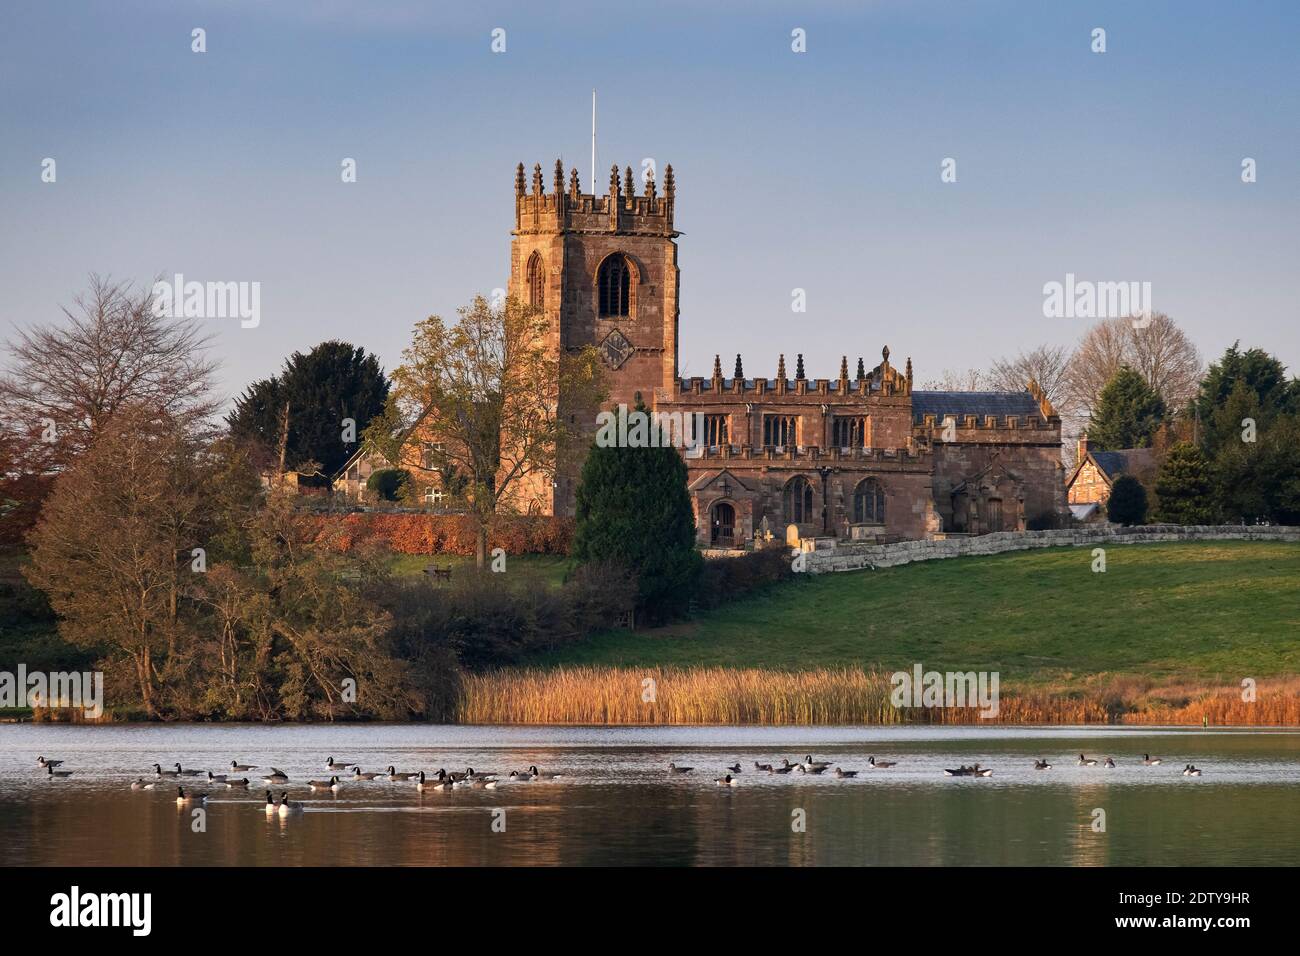 Canada Geese on Big Mere backed by St Michael’s Church, Marbury, Cheshire, England, UK Stock Photo